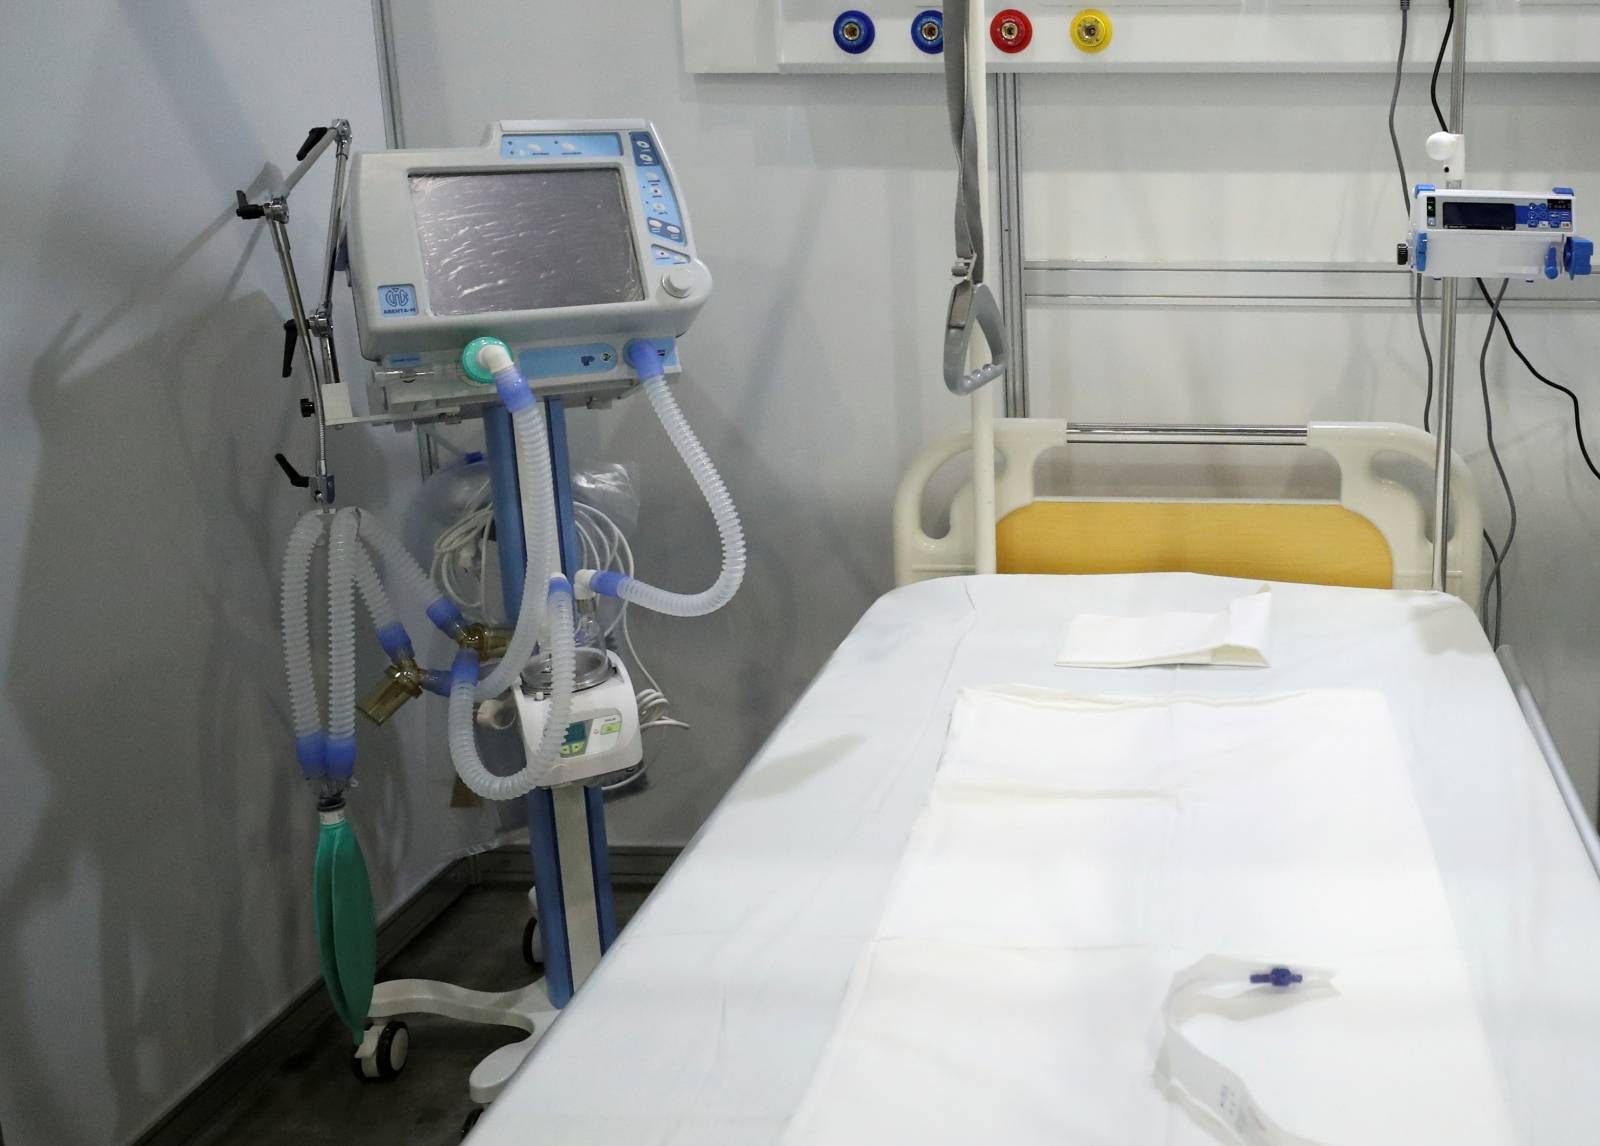 FILE PHOTO: A view shows an Aventa-M medical ventilator inside a pavilion of an exhibition centre on the outskirts of Moscow